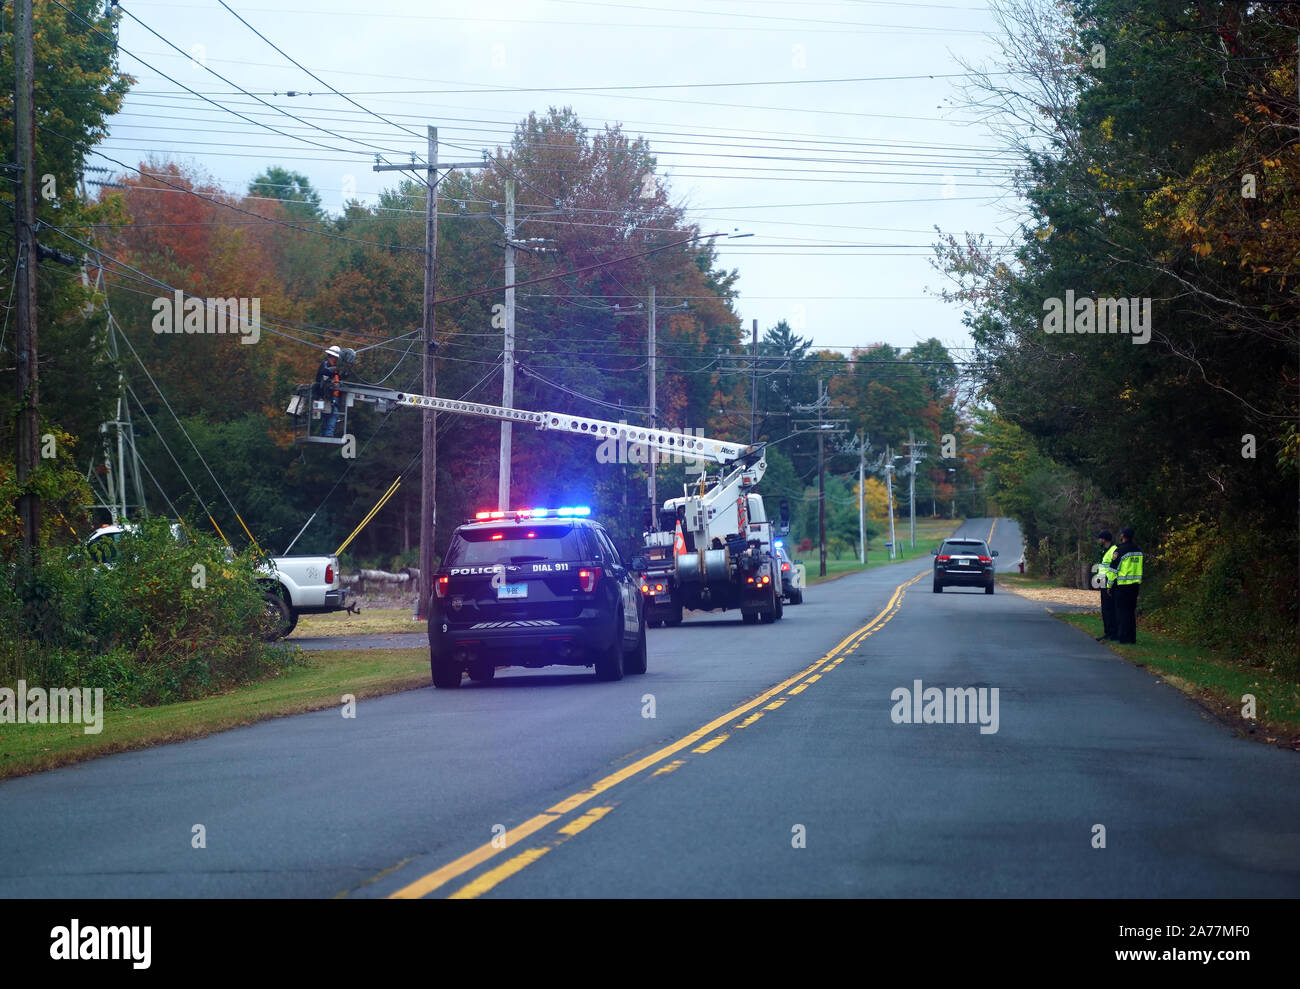 Berlin, CT USA. Oct 3 2019. Police vehicle accompanying telecommunications personnel in hydraulic man lift installing new cable lines. Stock Photo